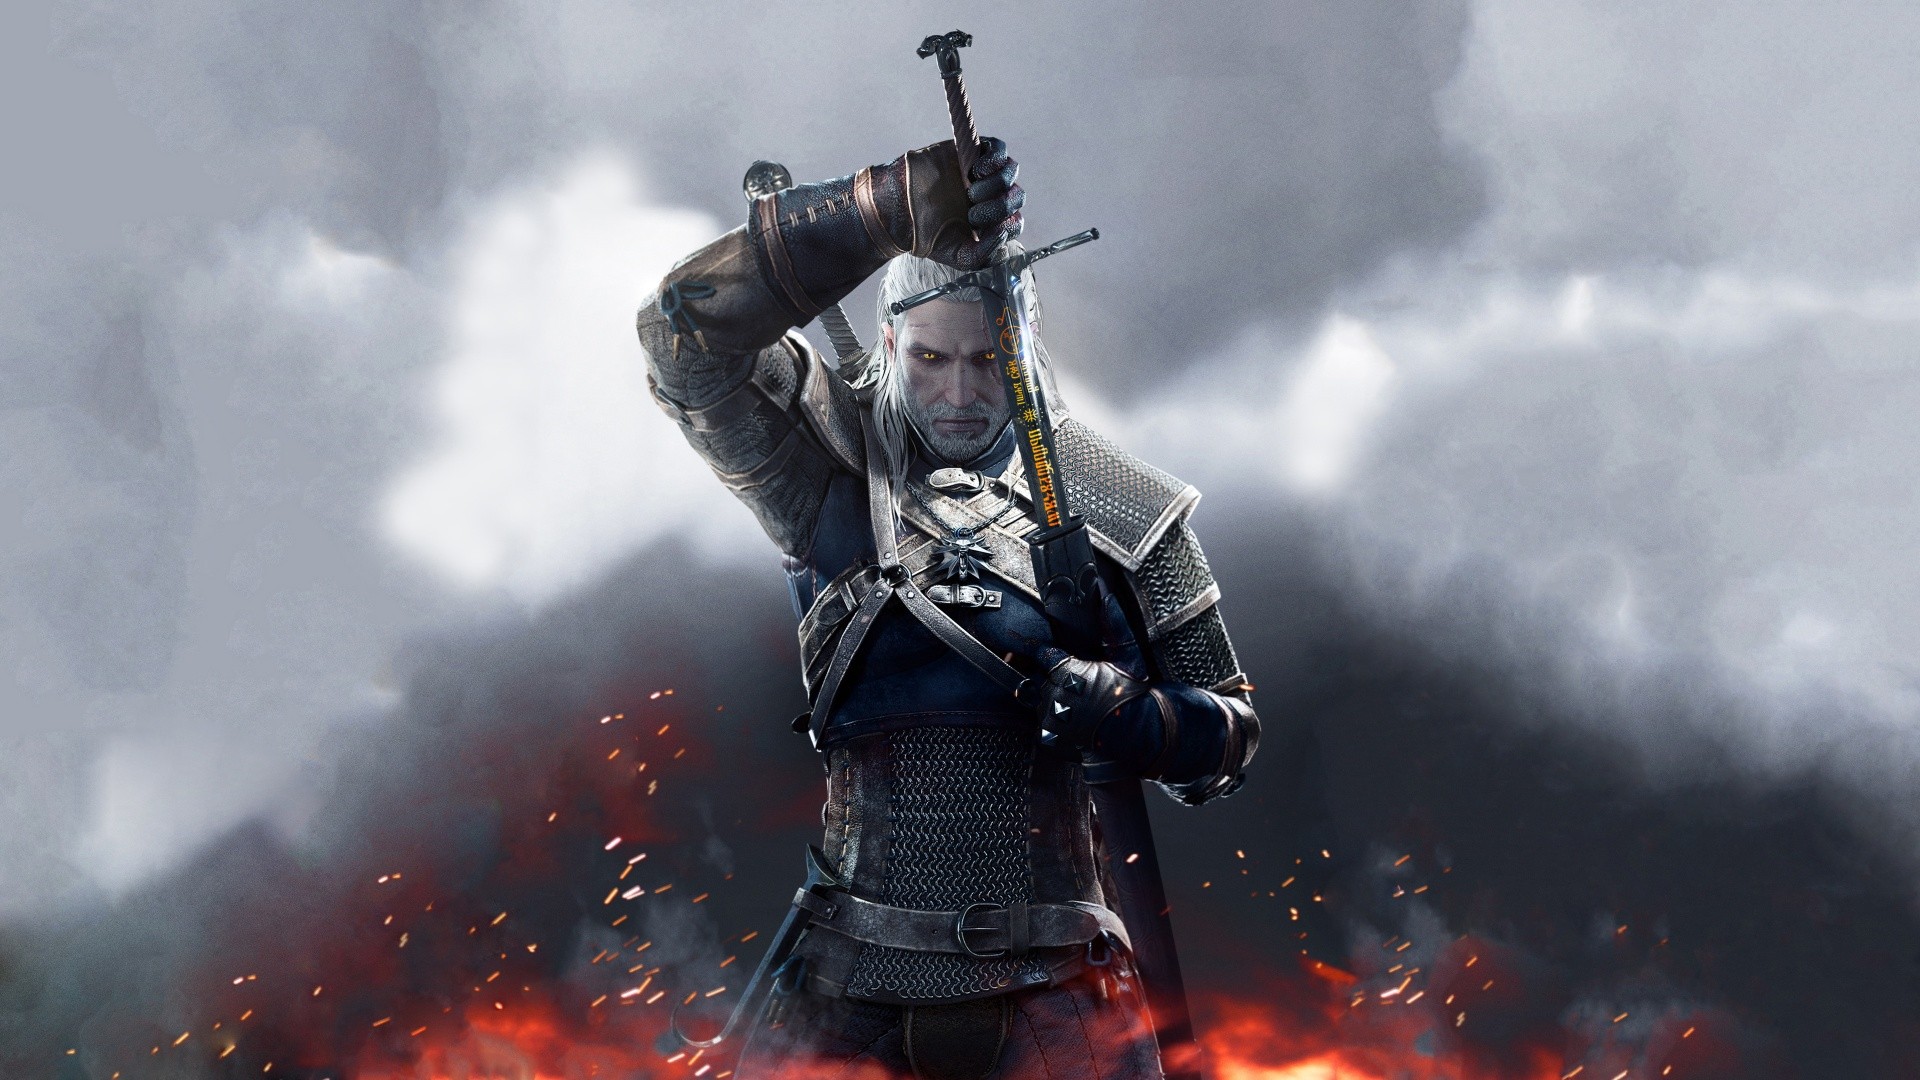 General 1920x1080 video games The Witcher 3: Wild Hunt sword video game art The Witcher looking at viewer frontal view video game characters Video Game Heroes RPG video game men fantasy art fantasy men PC gaming CD Projekt RED